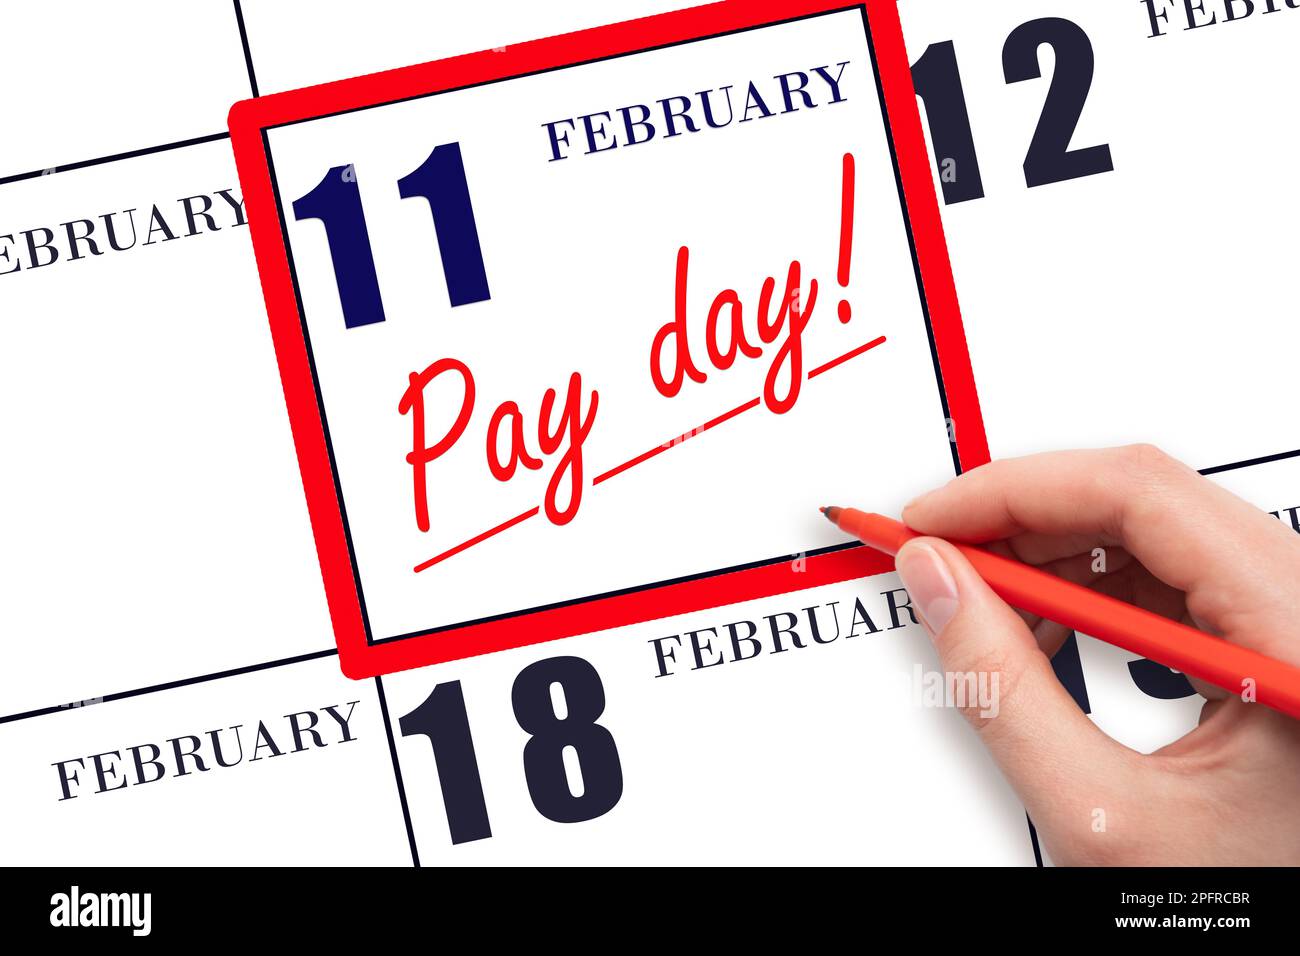 11th day of February. Hand writing text PAY DATE on calendar date February 11 and underline it. Payment due date.  Reminder concept of payment. Winter Stock Photo